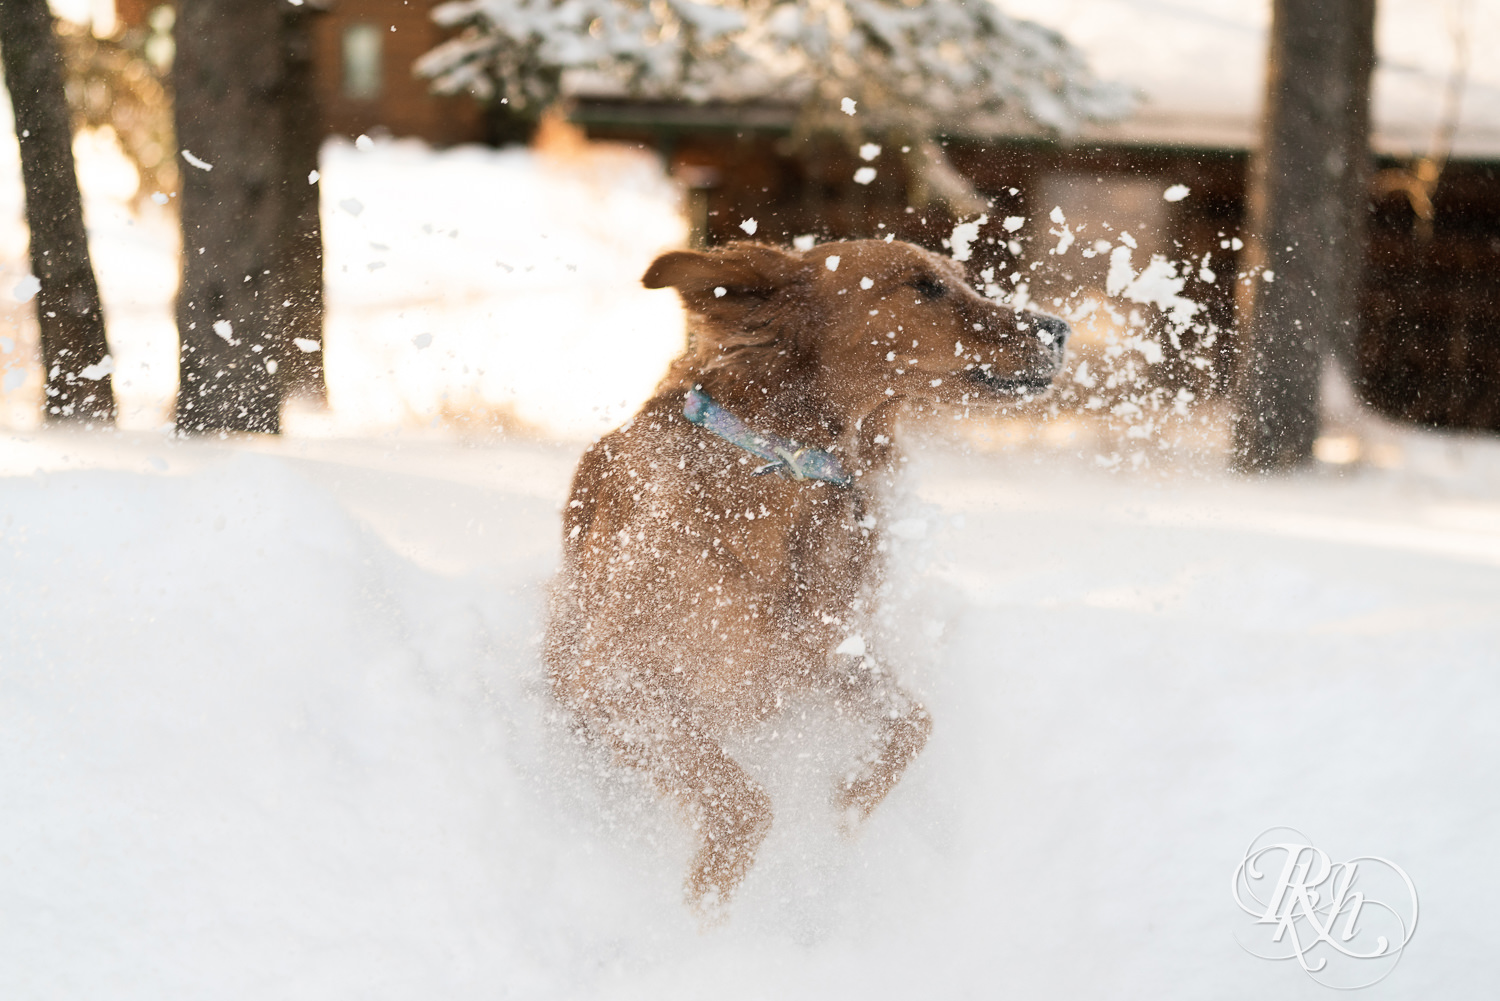 Golden Retriever playing in the snow at Grand Superior Lodge in Two Harbors, Minnesota.